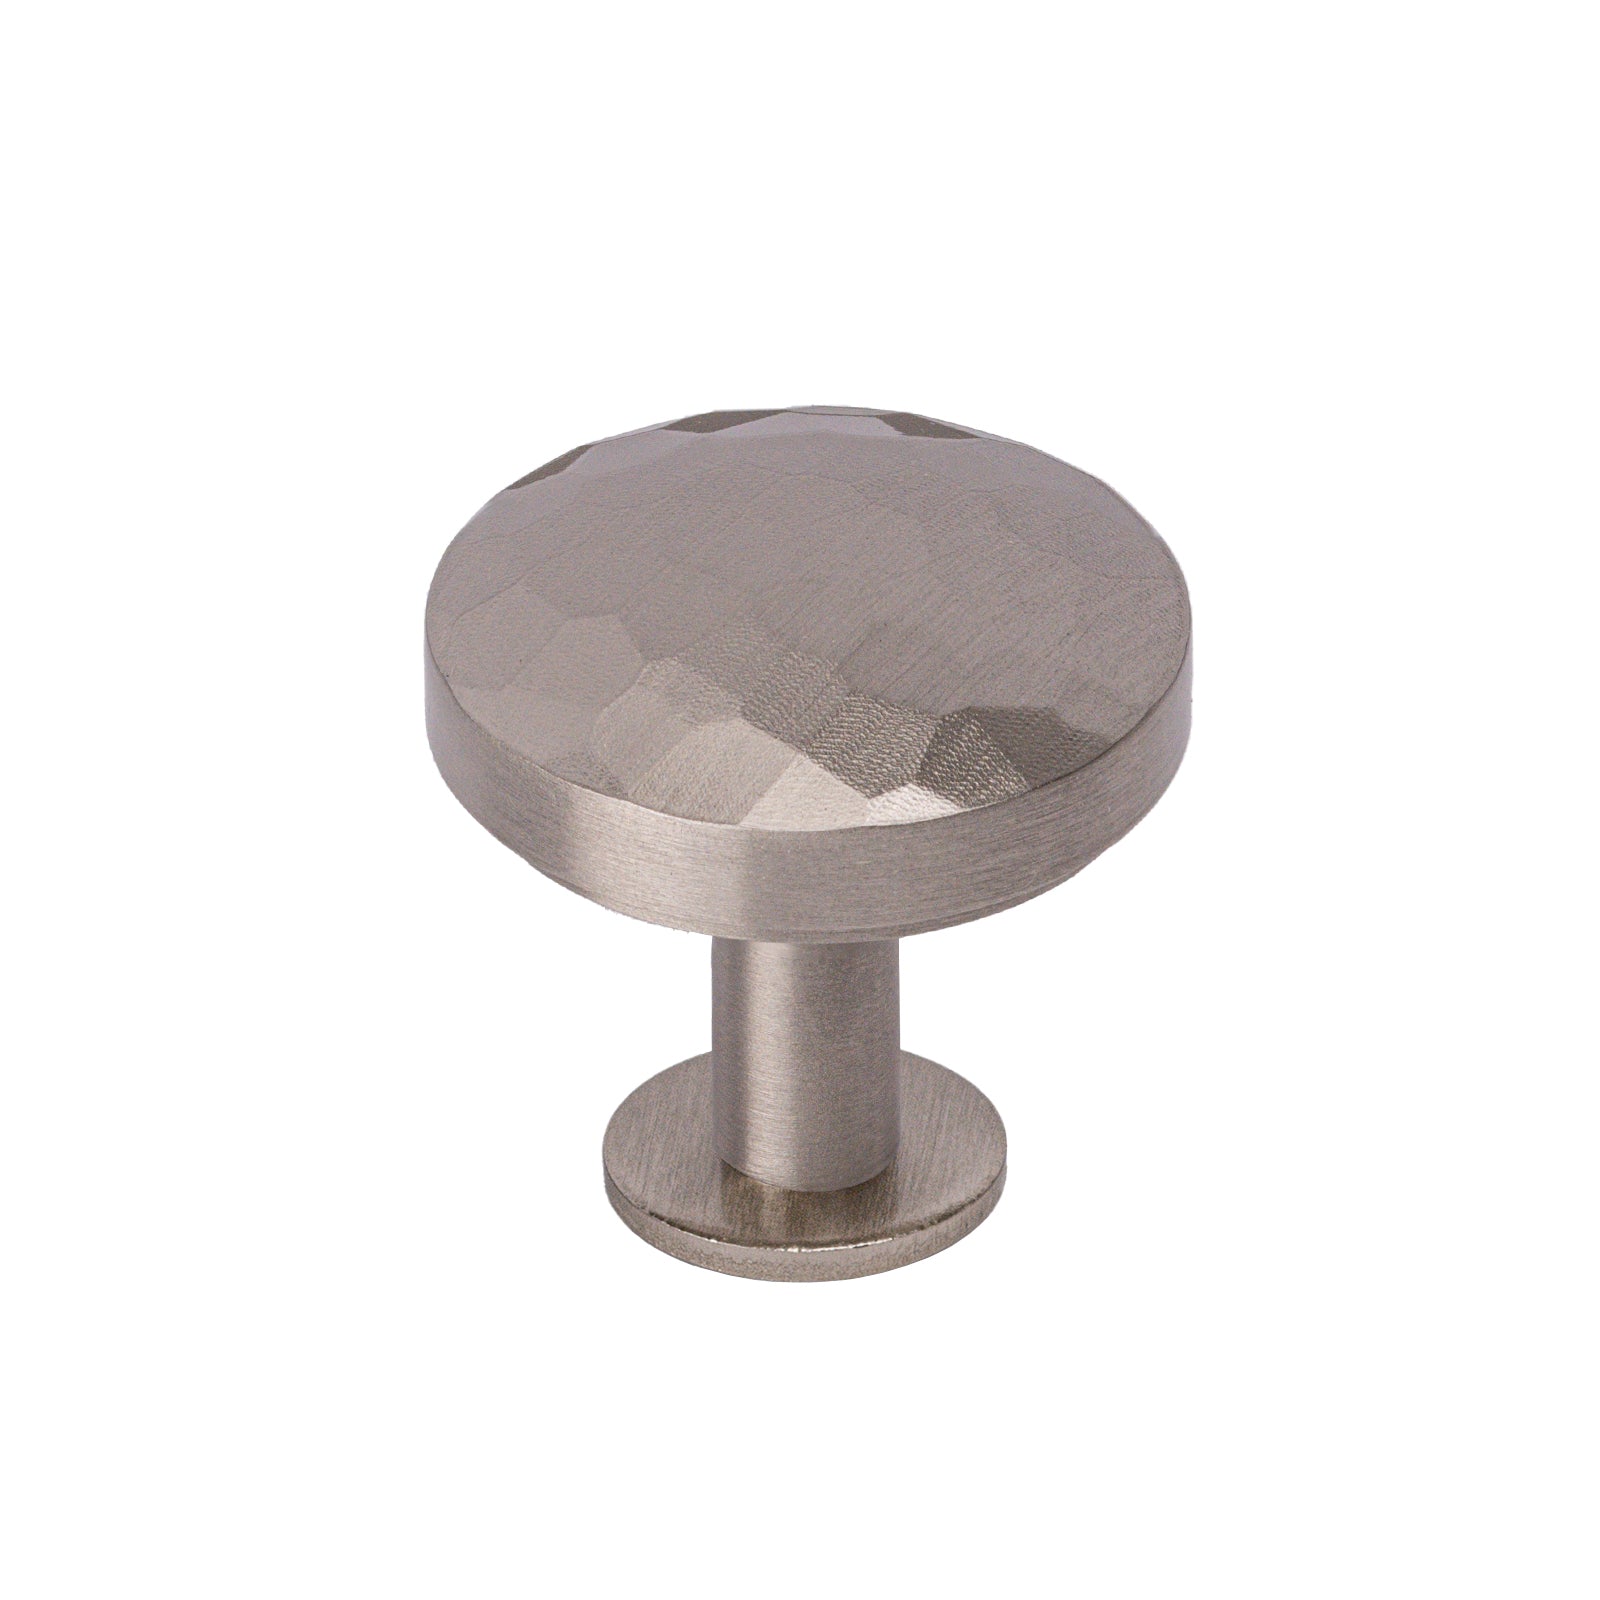 satin nickel hammered knobs with rose plate, kitchen cupboard knobs SHOW